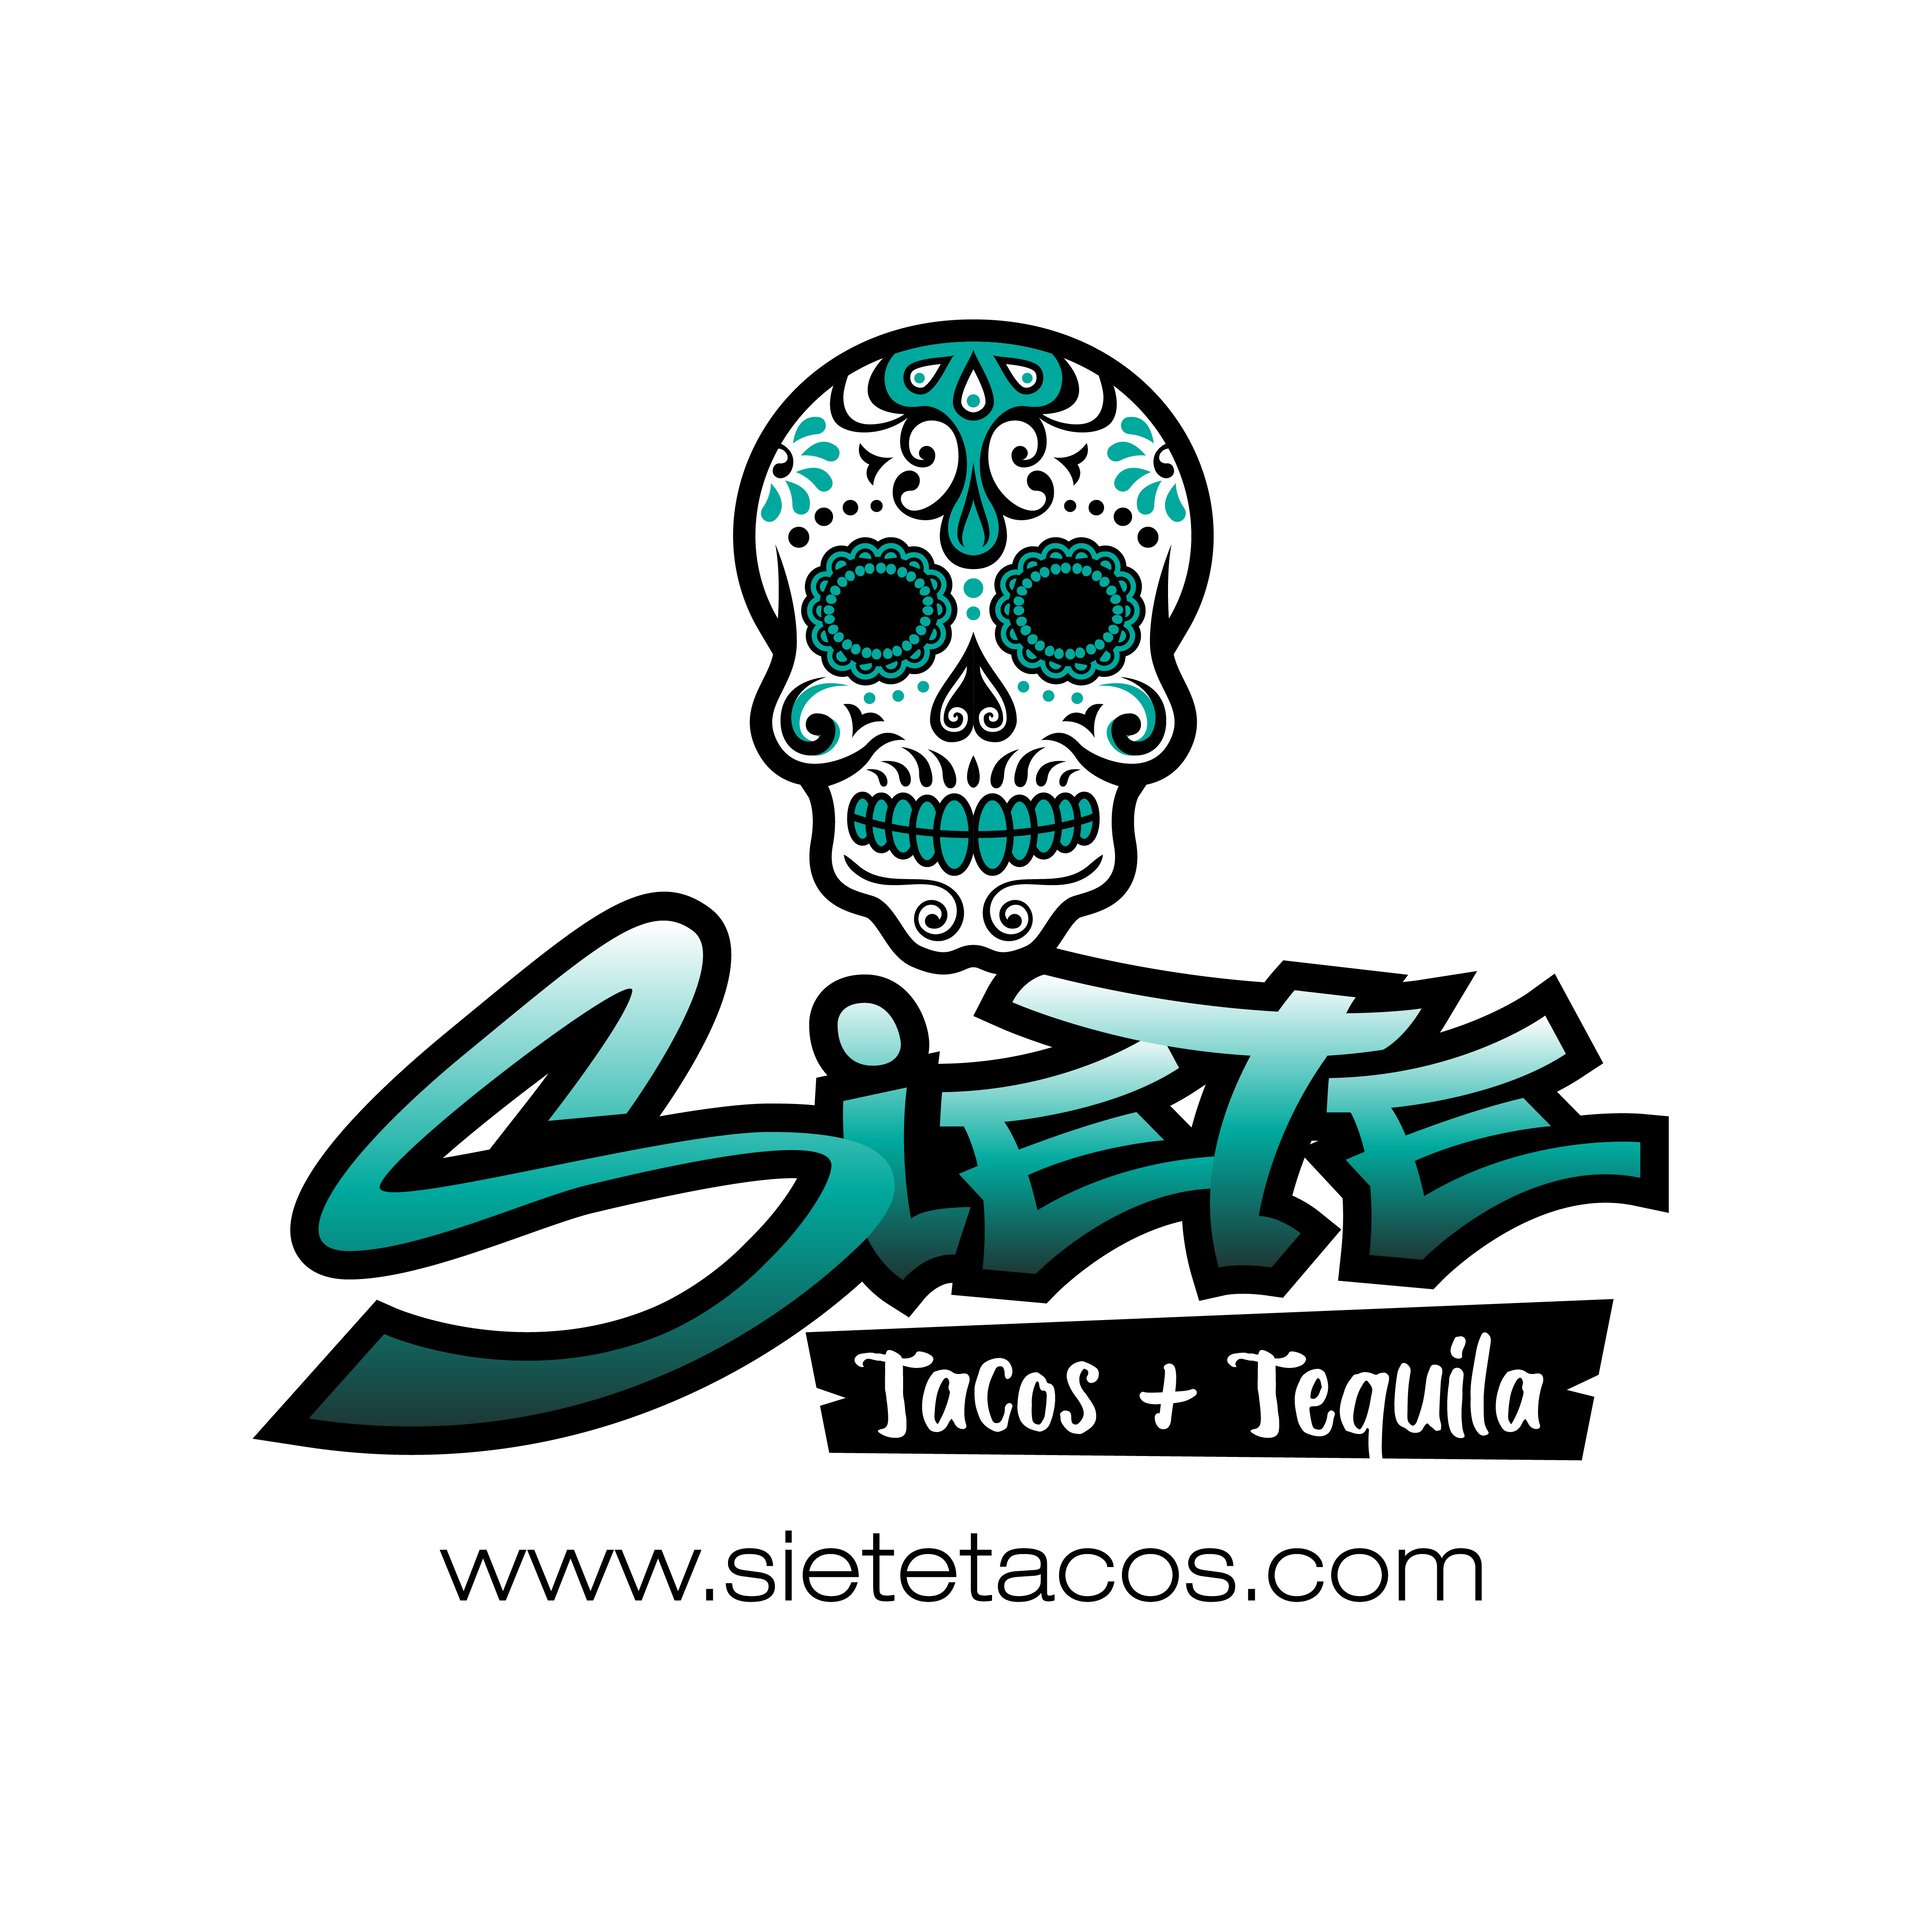 Siete Tacos & Tequila web with web logo